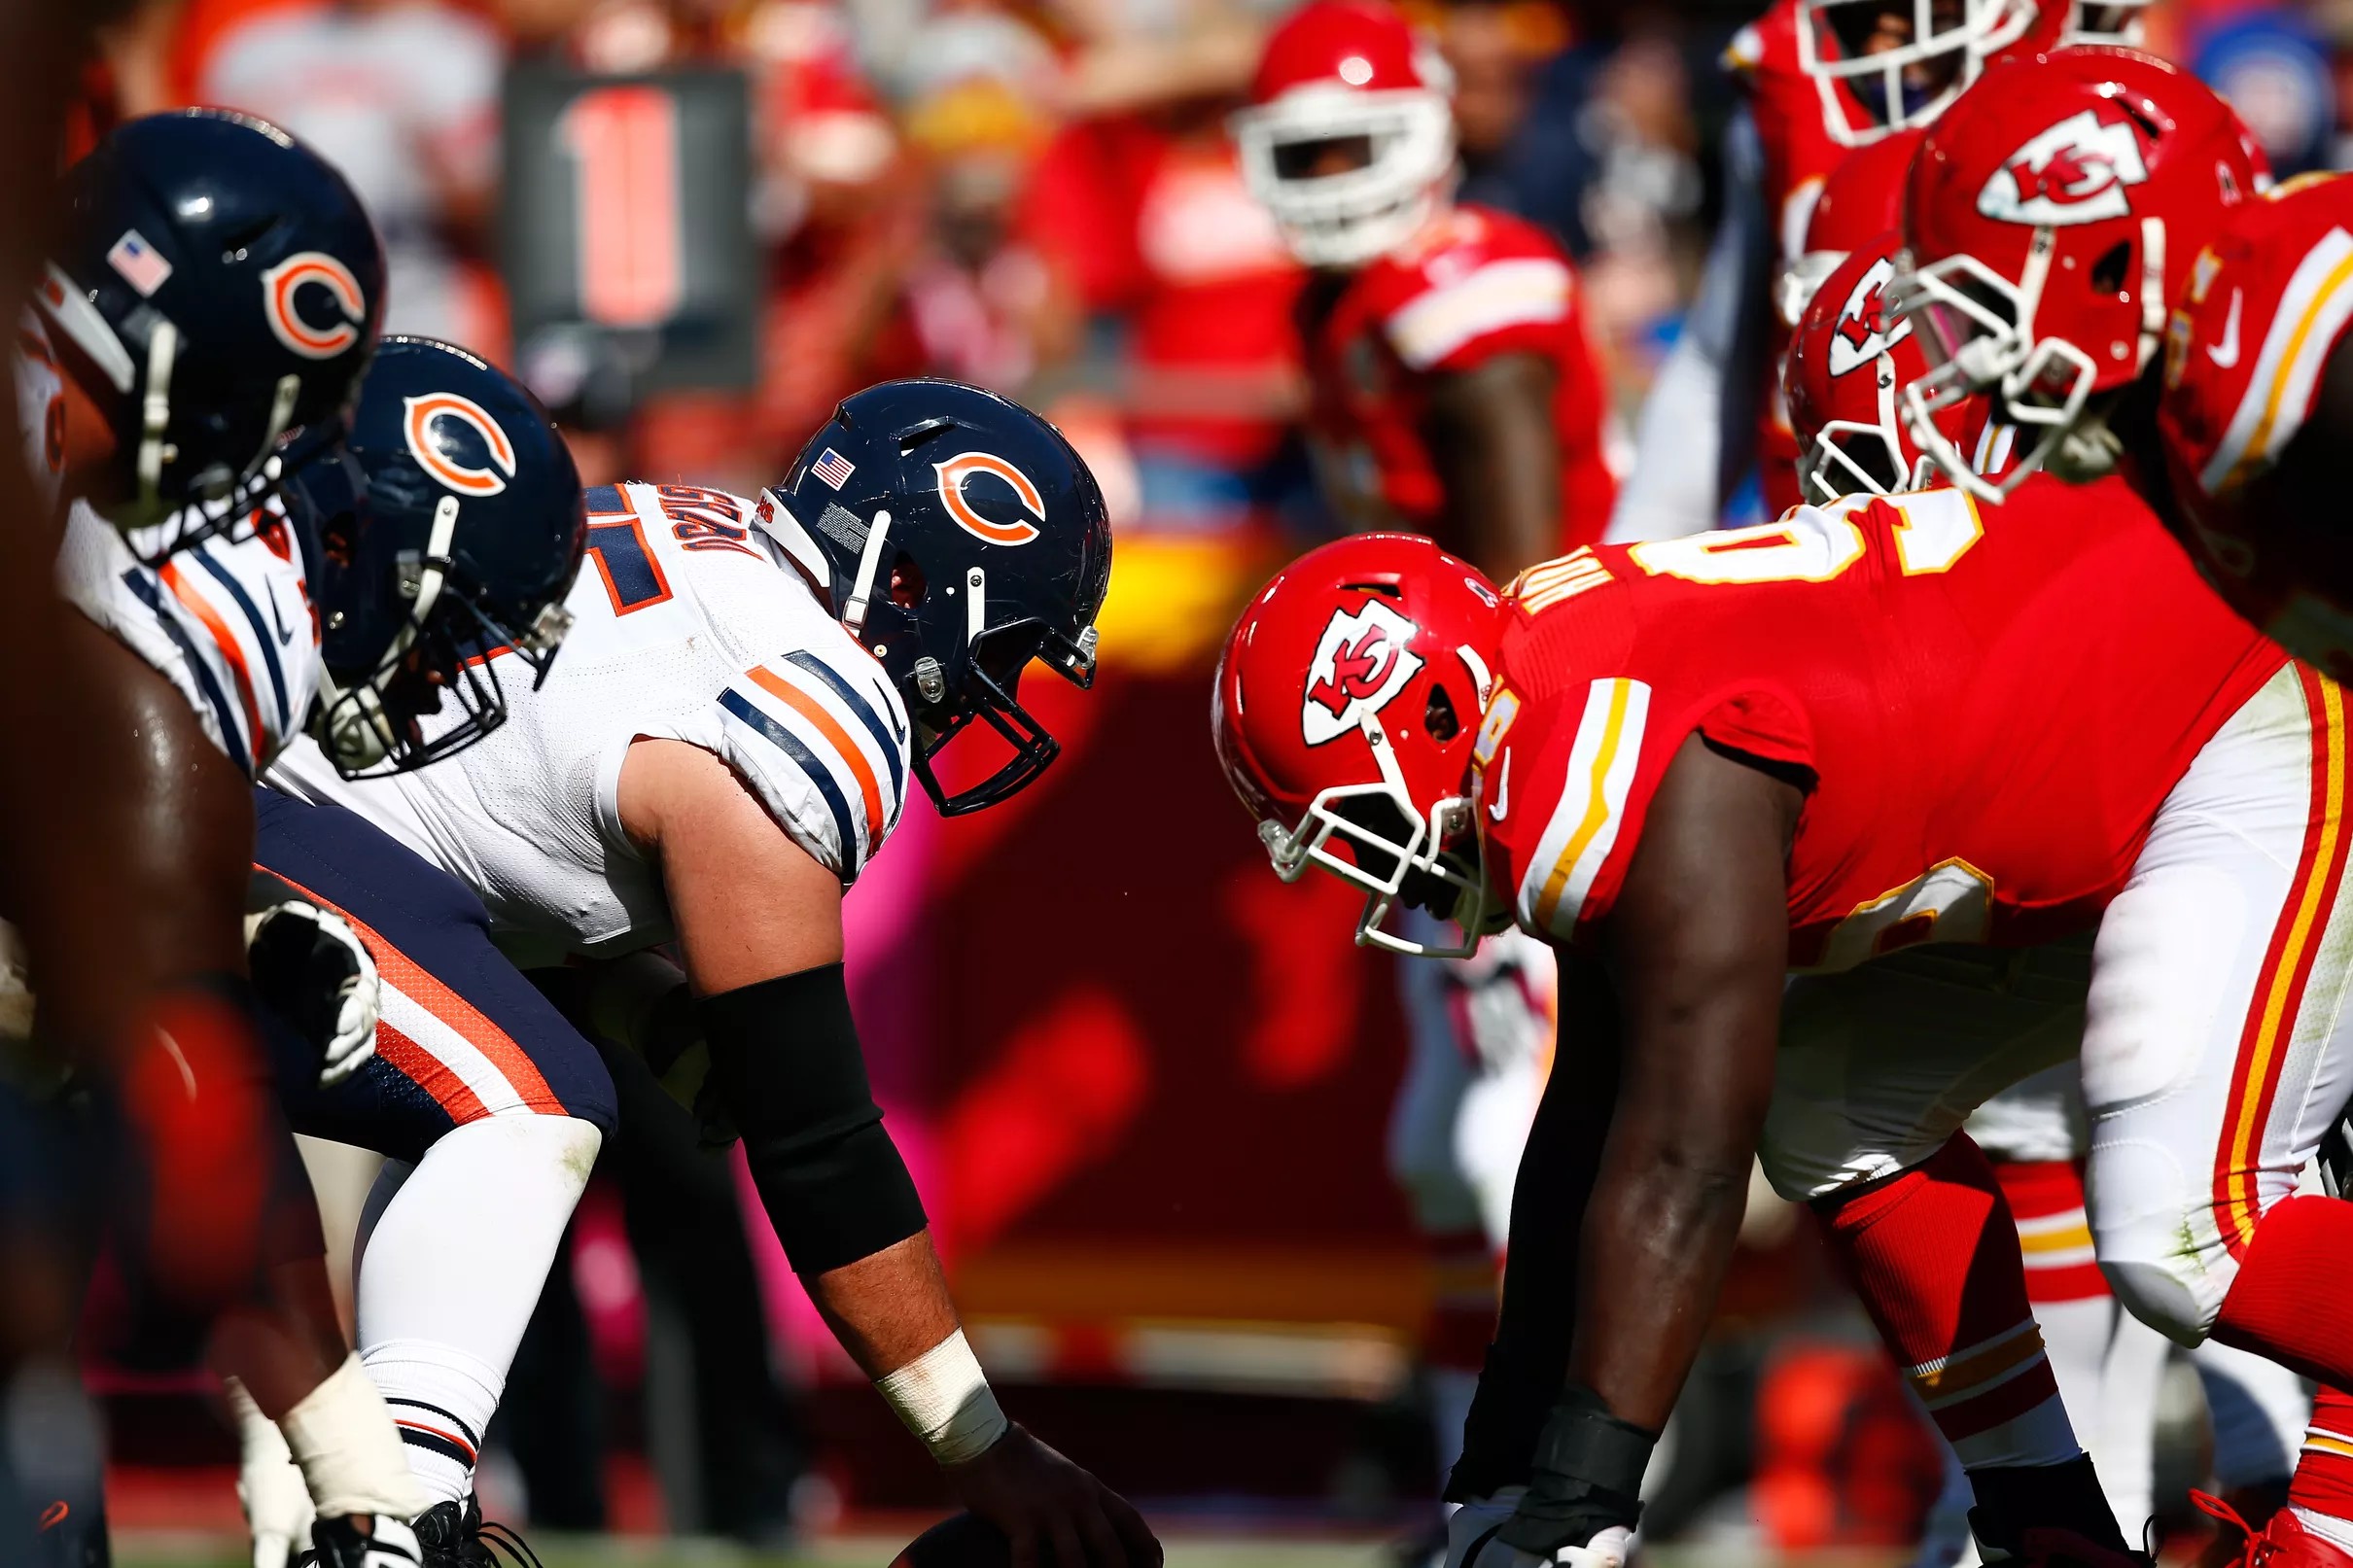 Bears vs. Chiefs 2018 Live updates from the game